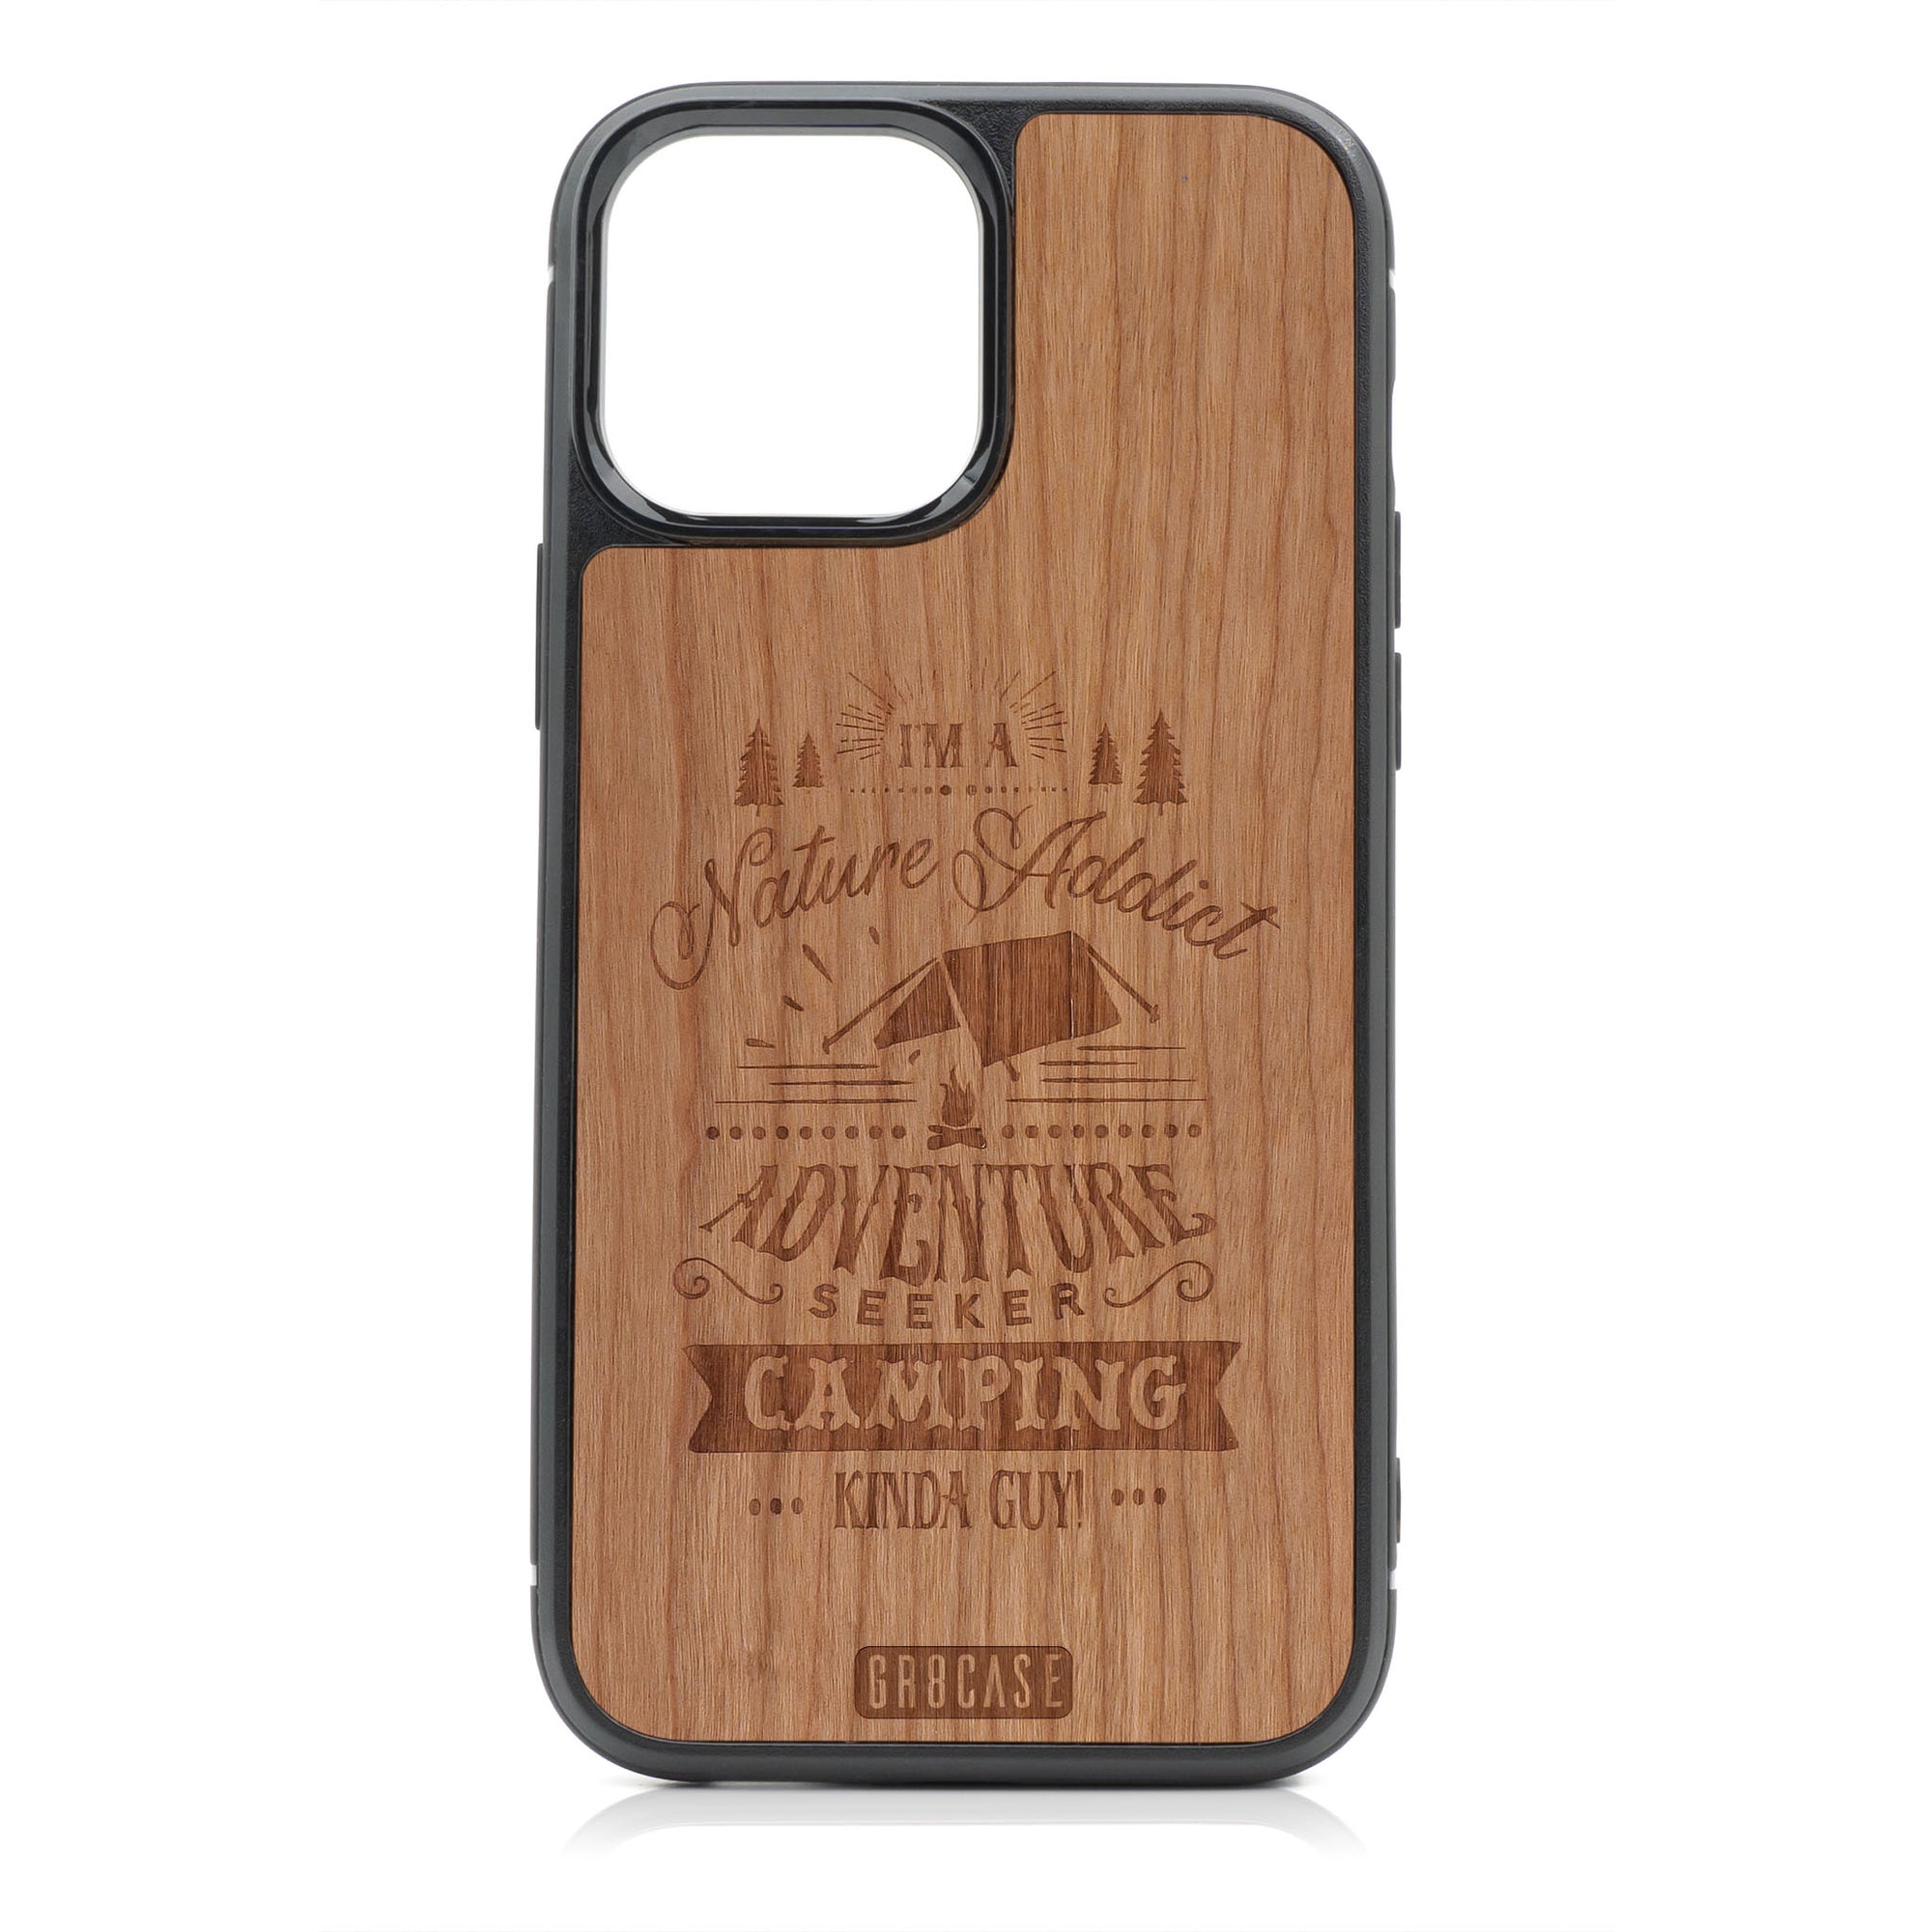 I'm A Nature Addict Adventure Seeker Camping Kinda Guy Design Wood Case For iPhone 13 Pro Max